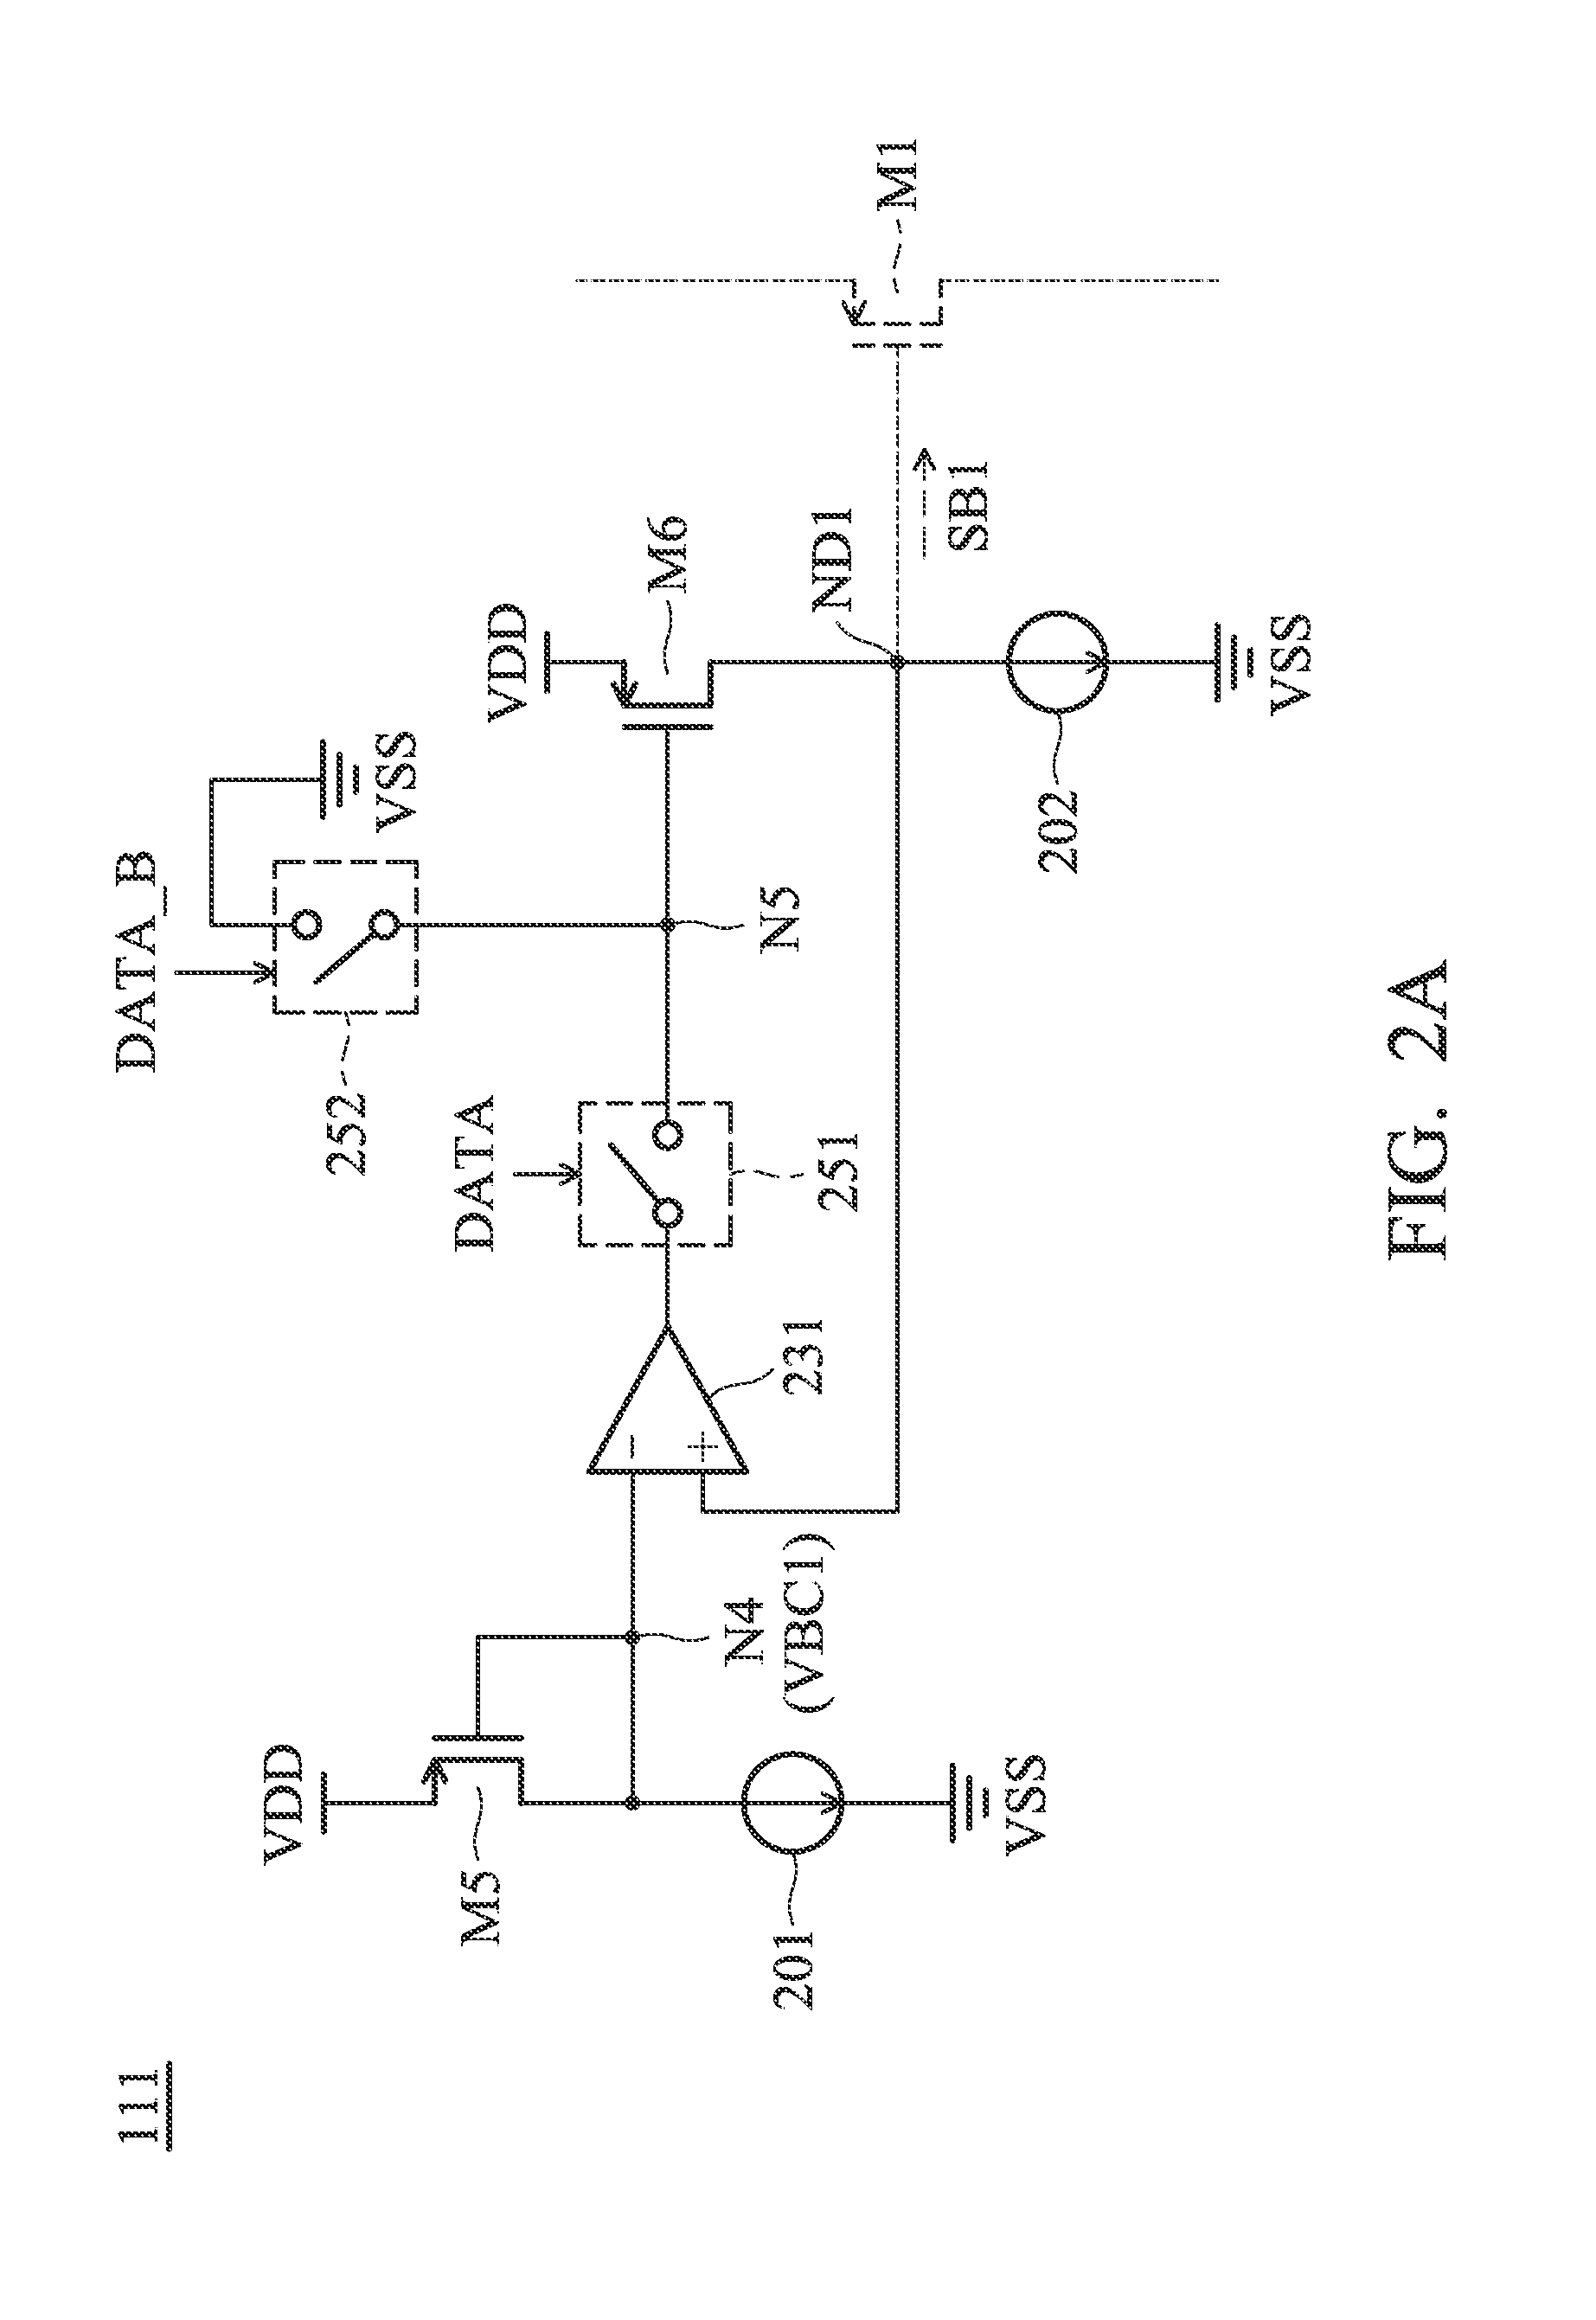 Low voltage differential signaling (LVDS) driving circuit